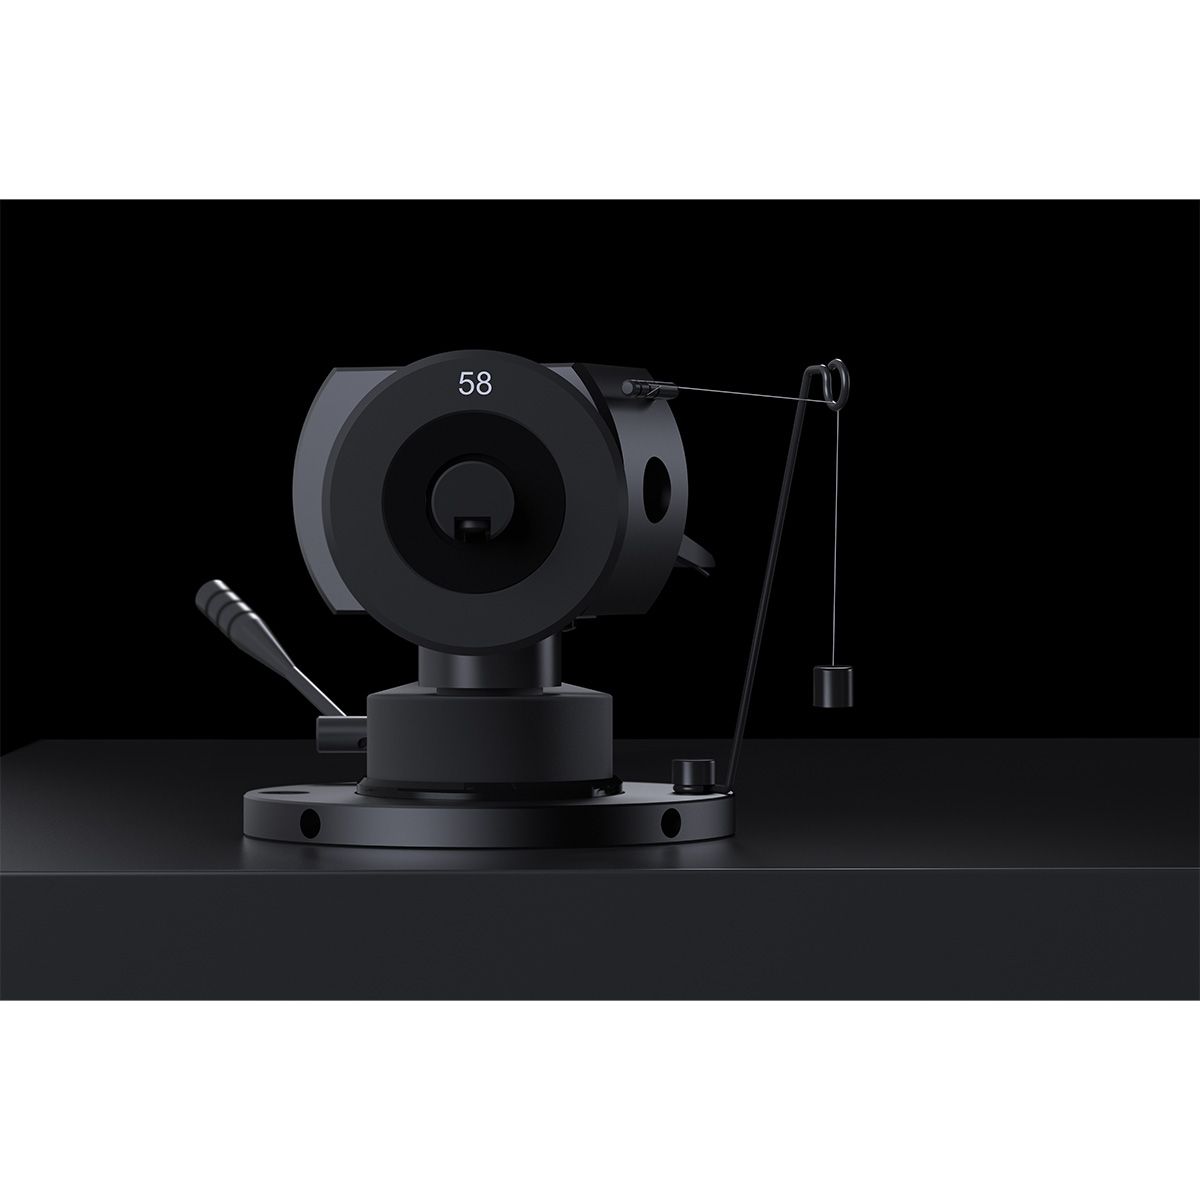  Pro-Ject Debut Pro S Turntable counterweight and tonearm assembly on black background 